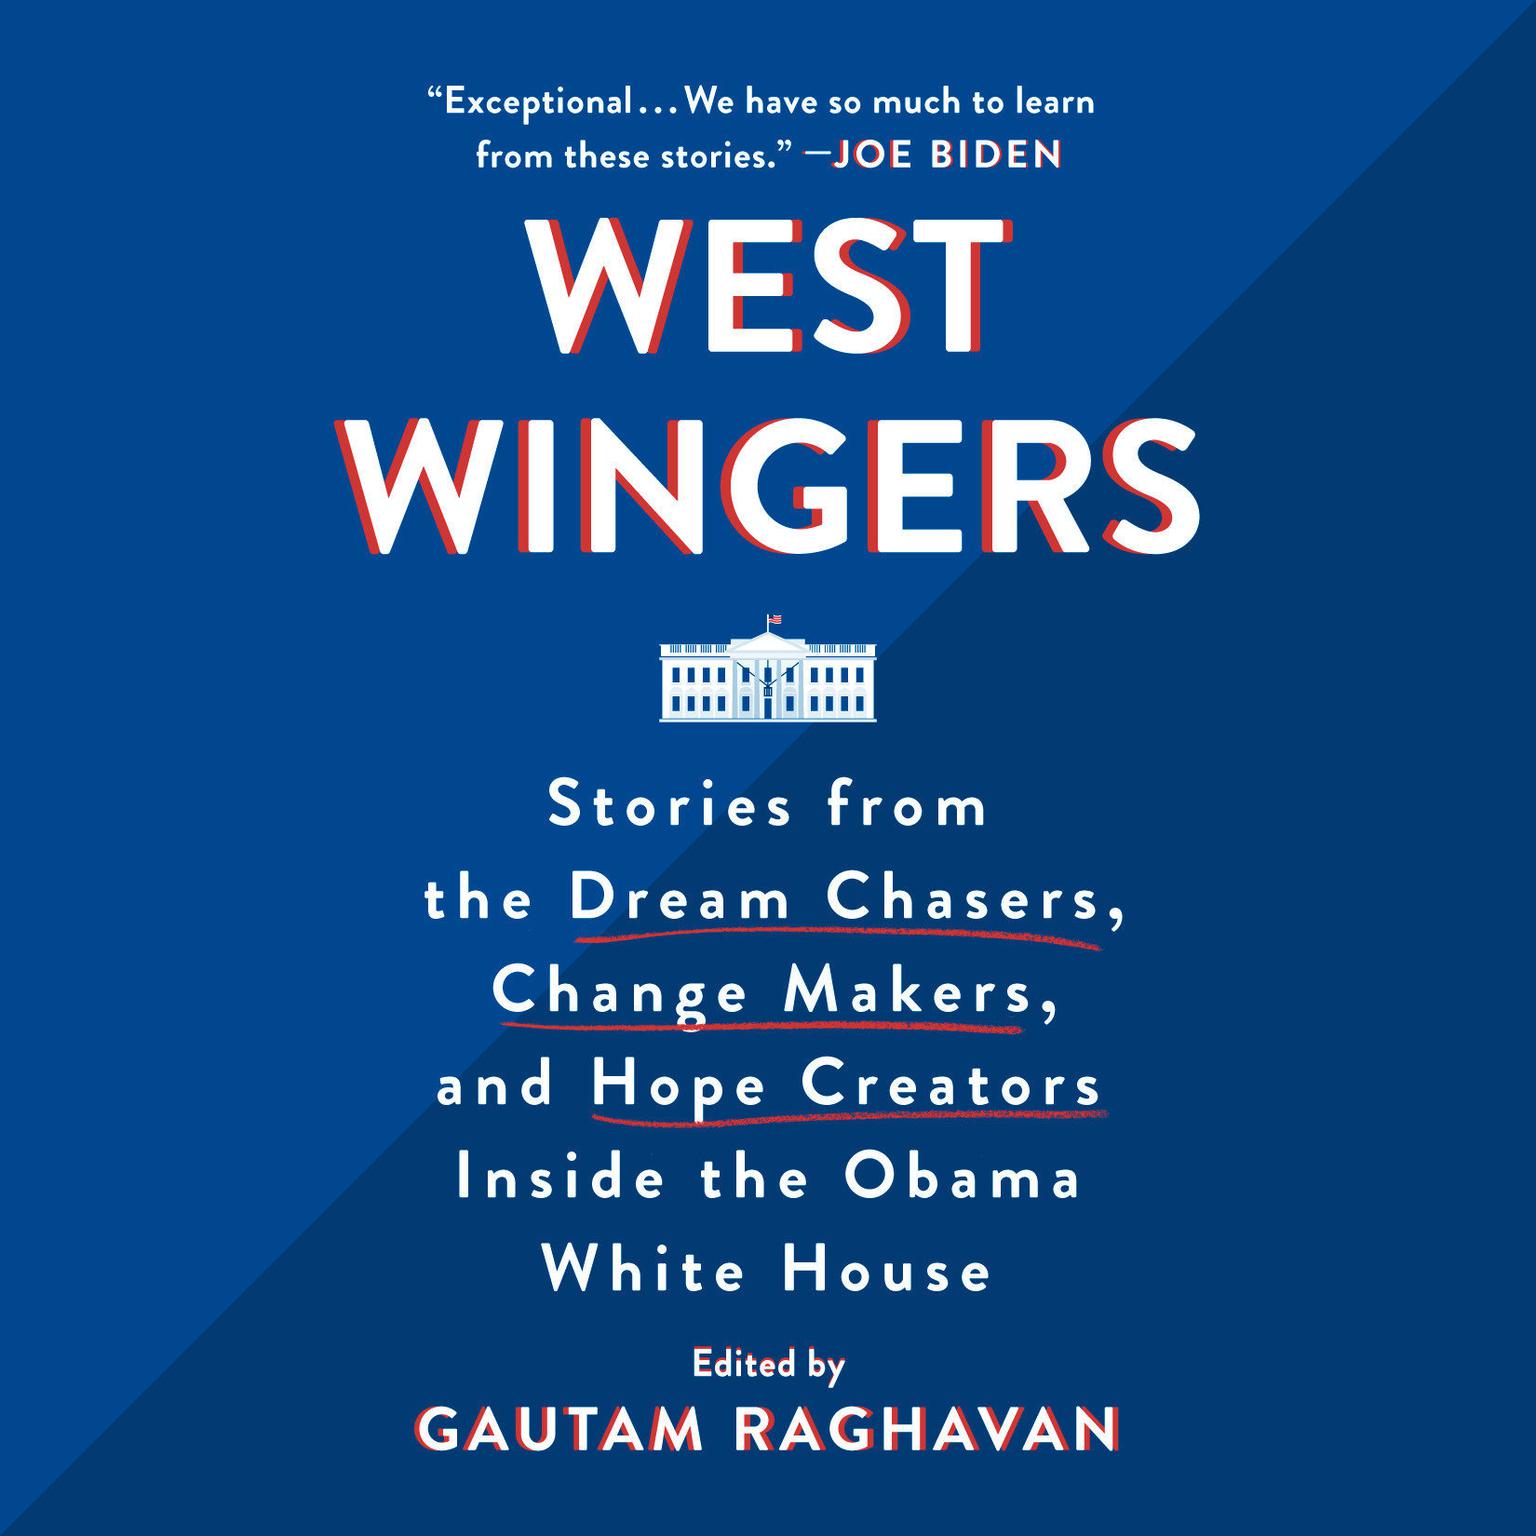 West Wingers: Stories from the Dream Chasers, Change Makers, and Hope Creators Inside the Obama White House Audiobook, by Gautam Raghavan